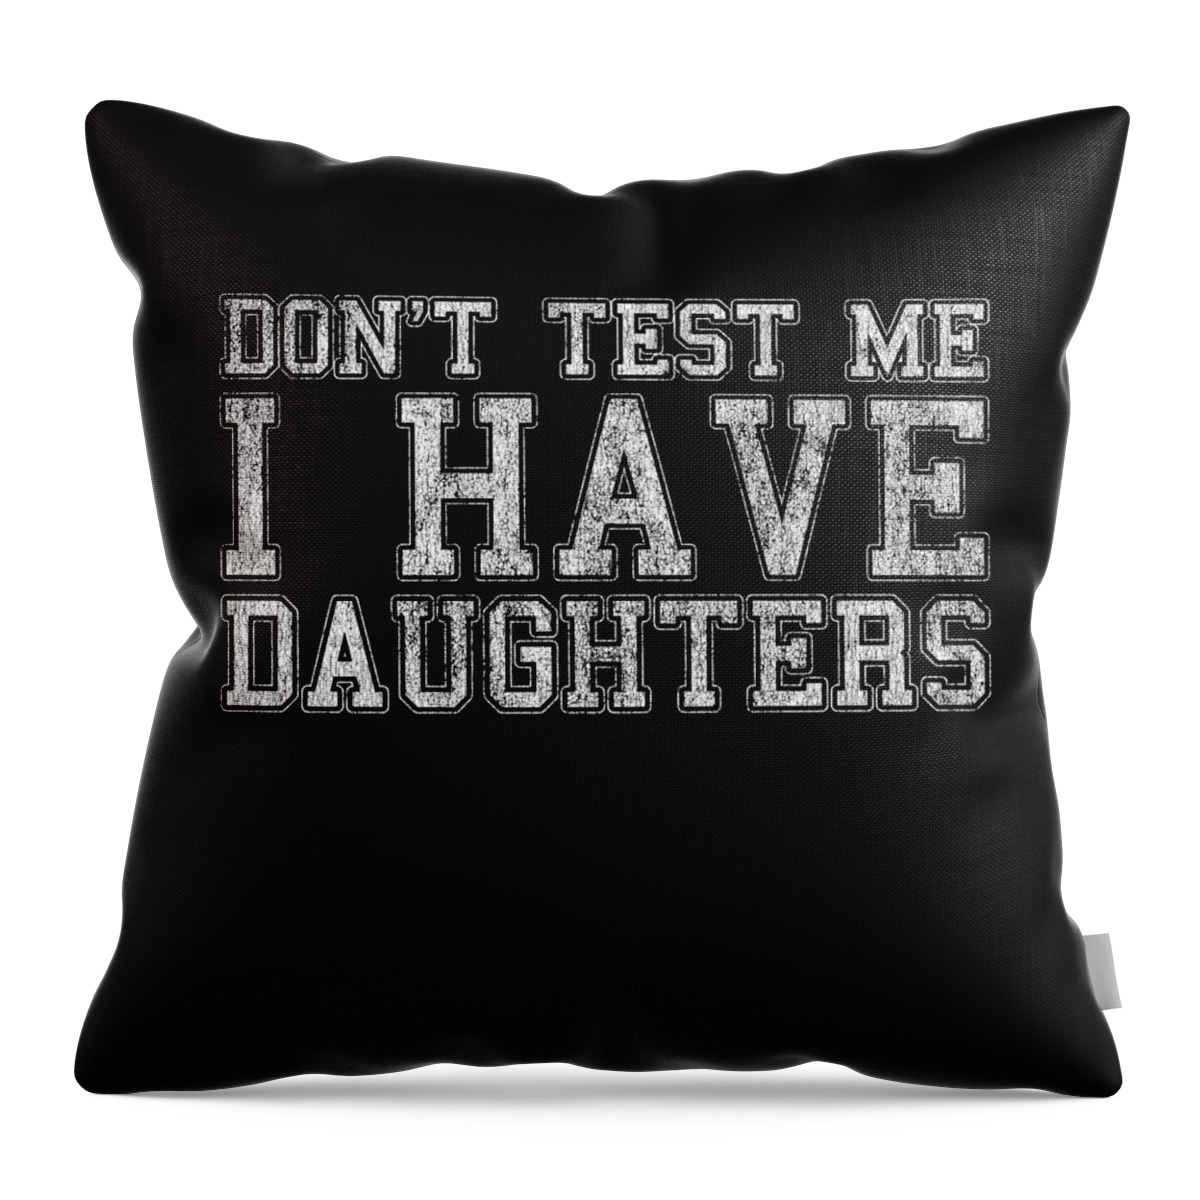 Funny Throw Pillow featuring the digital art Dont Test Me I Have Daughters by Flippin Sweet Gear